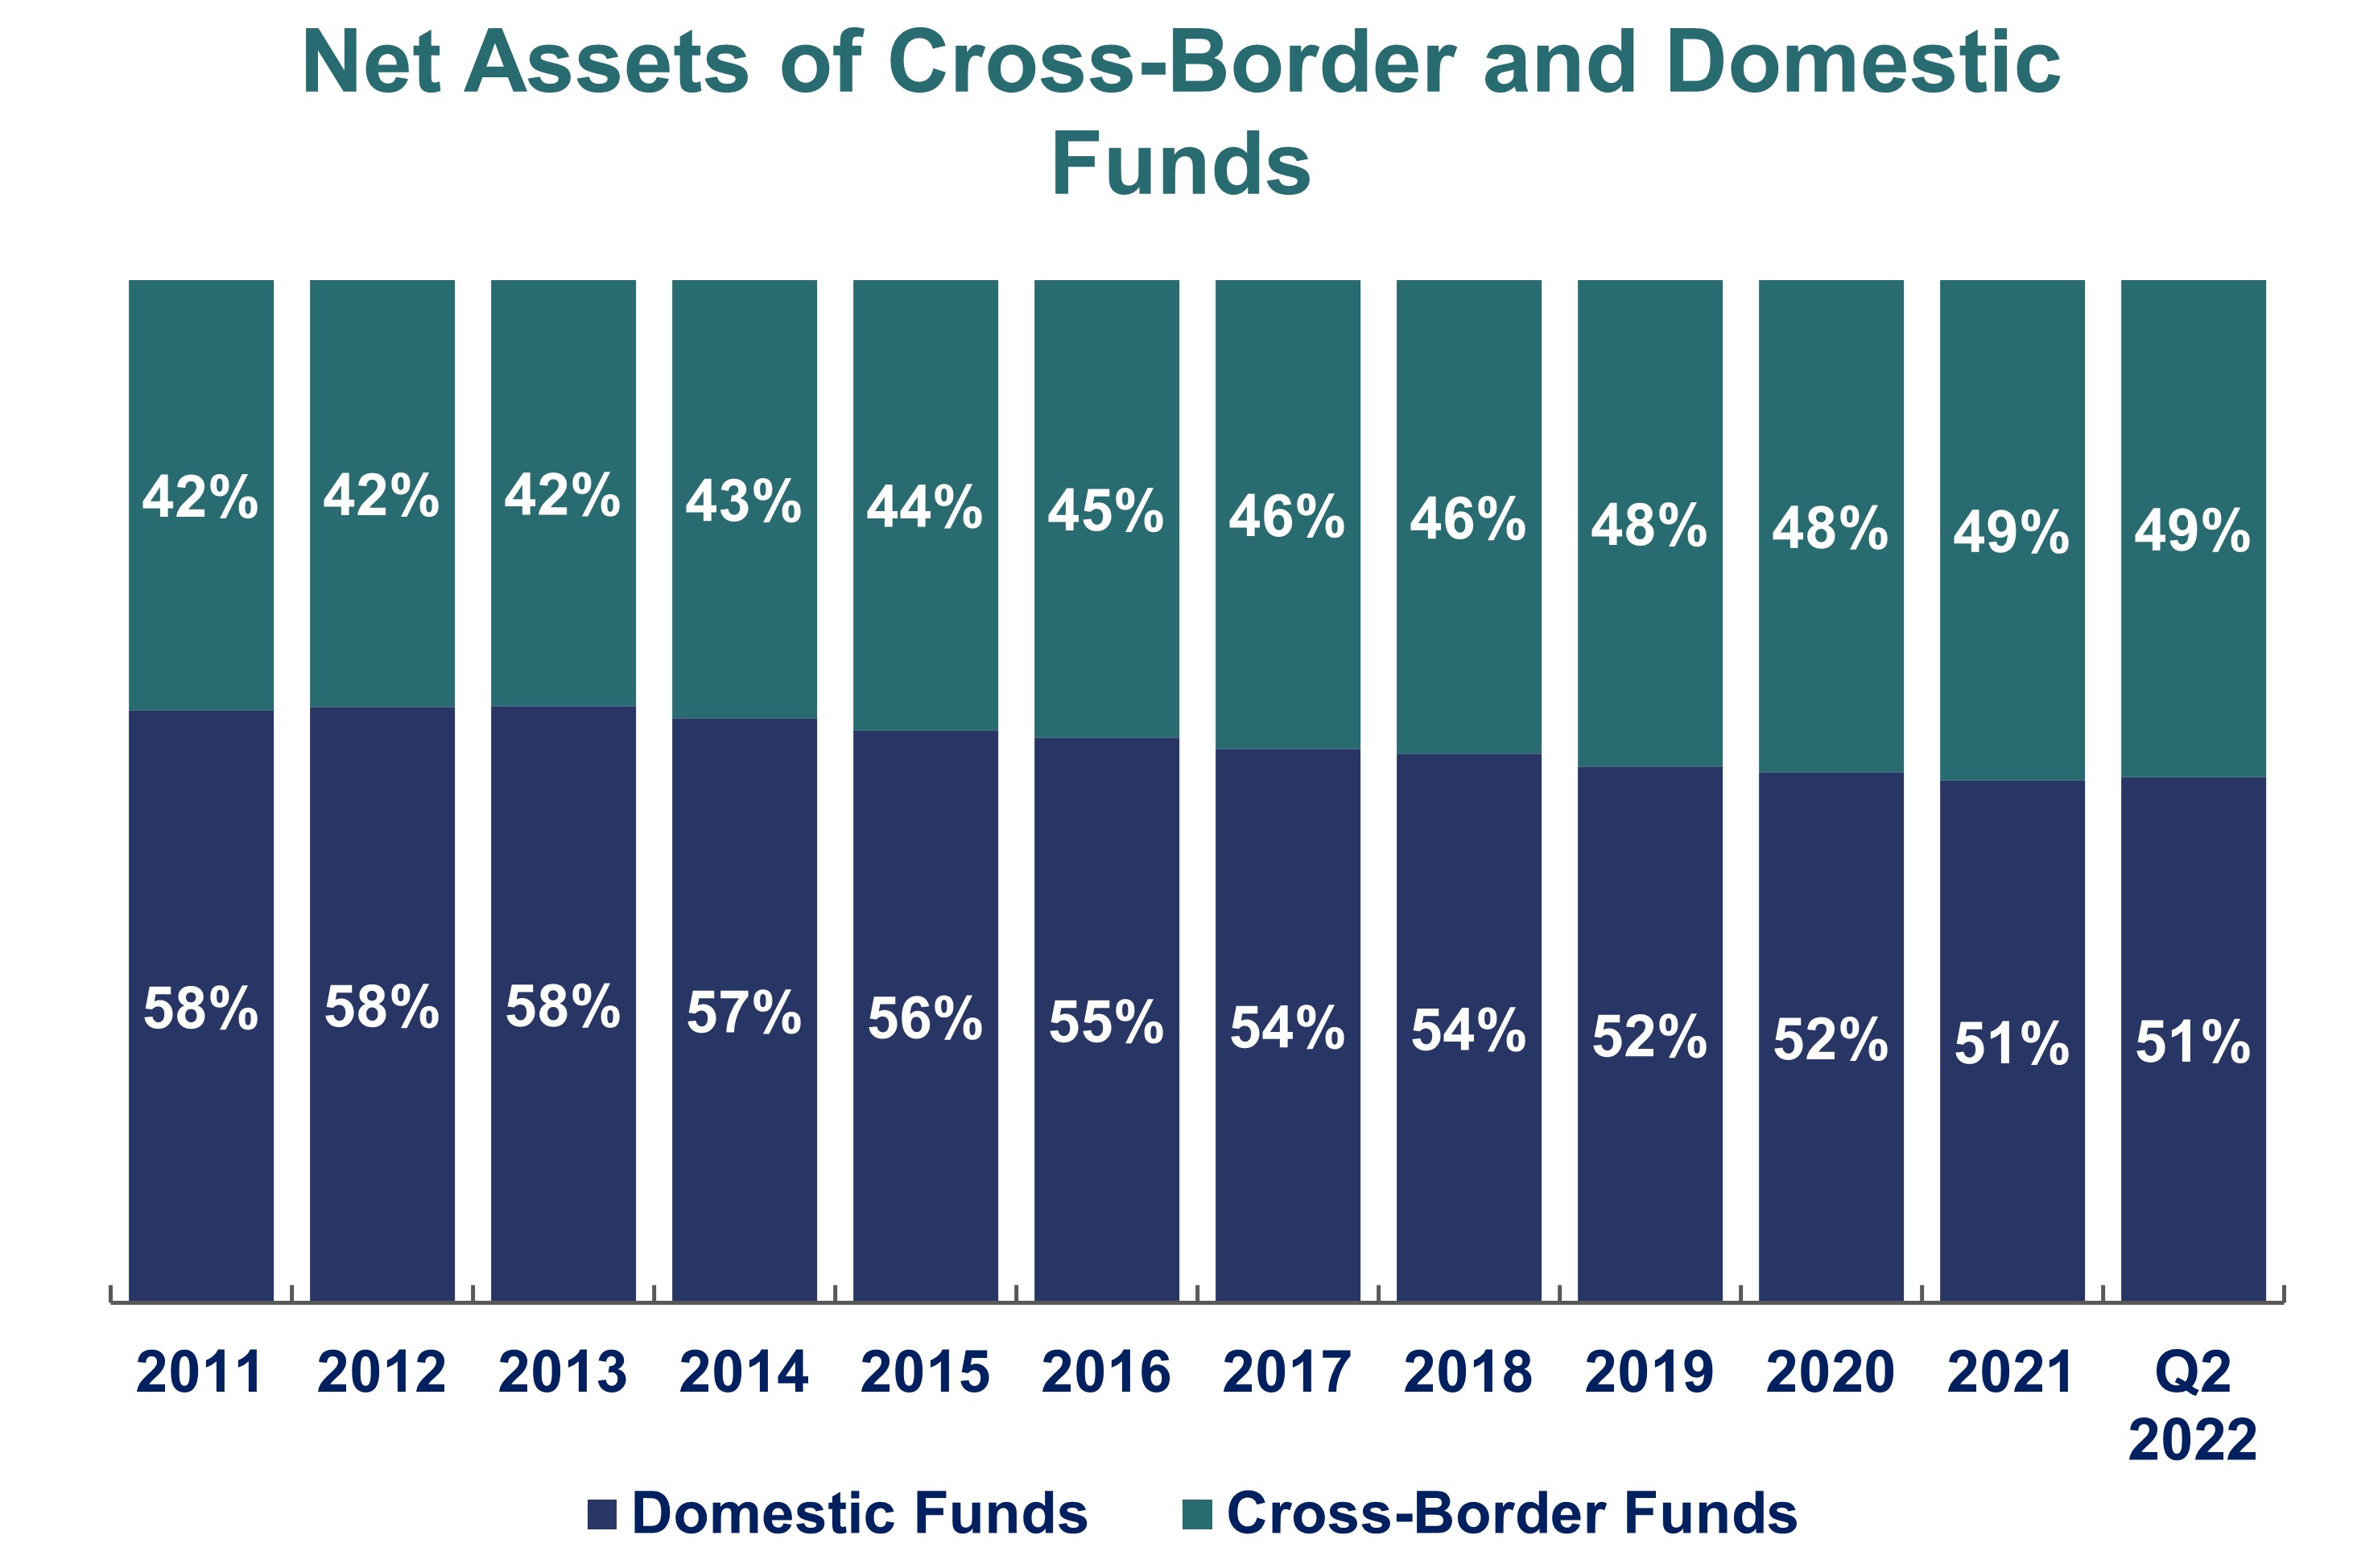 Net Assets of Cross-Border and Domestic Funds